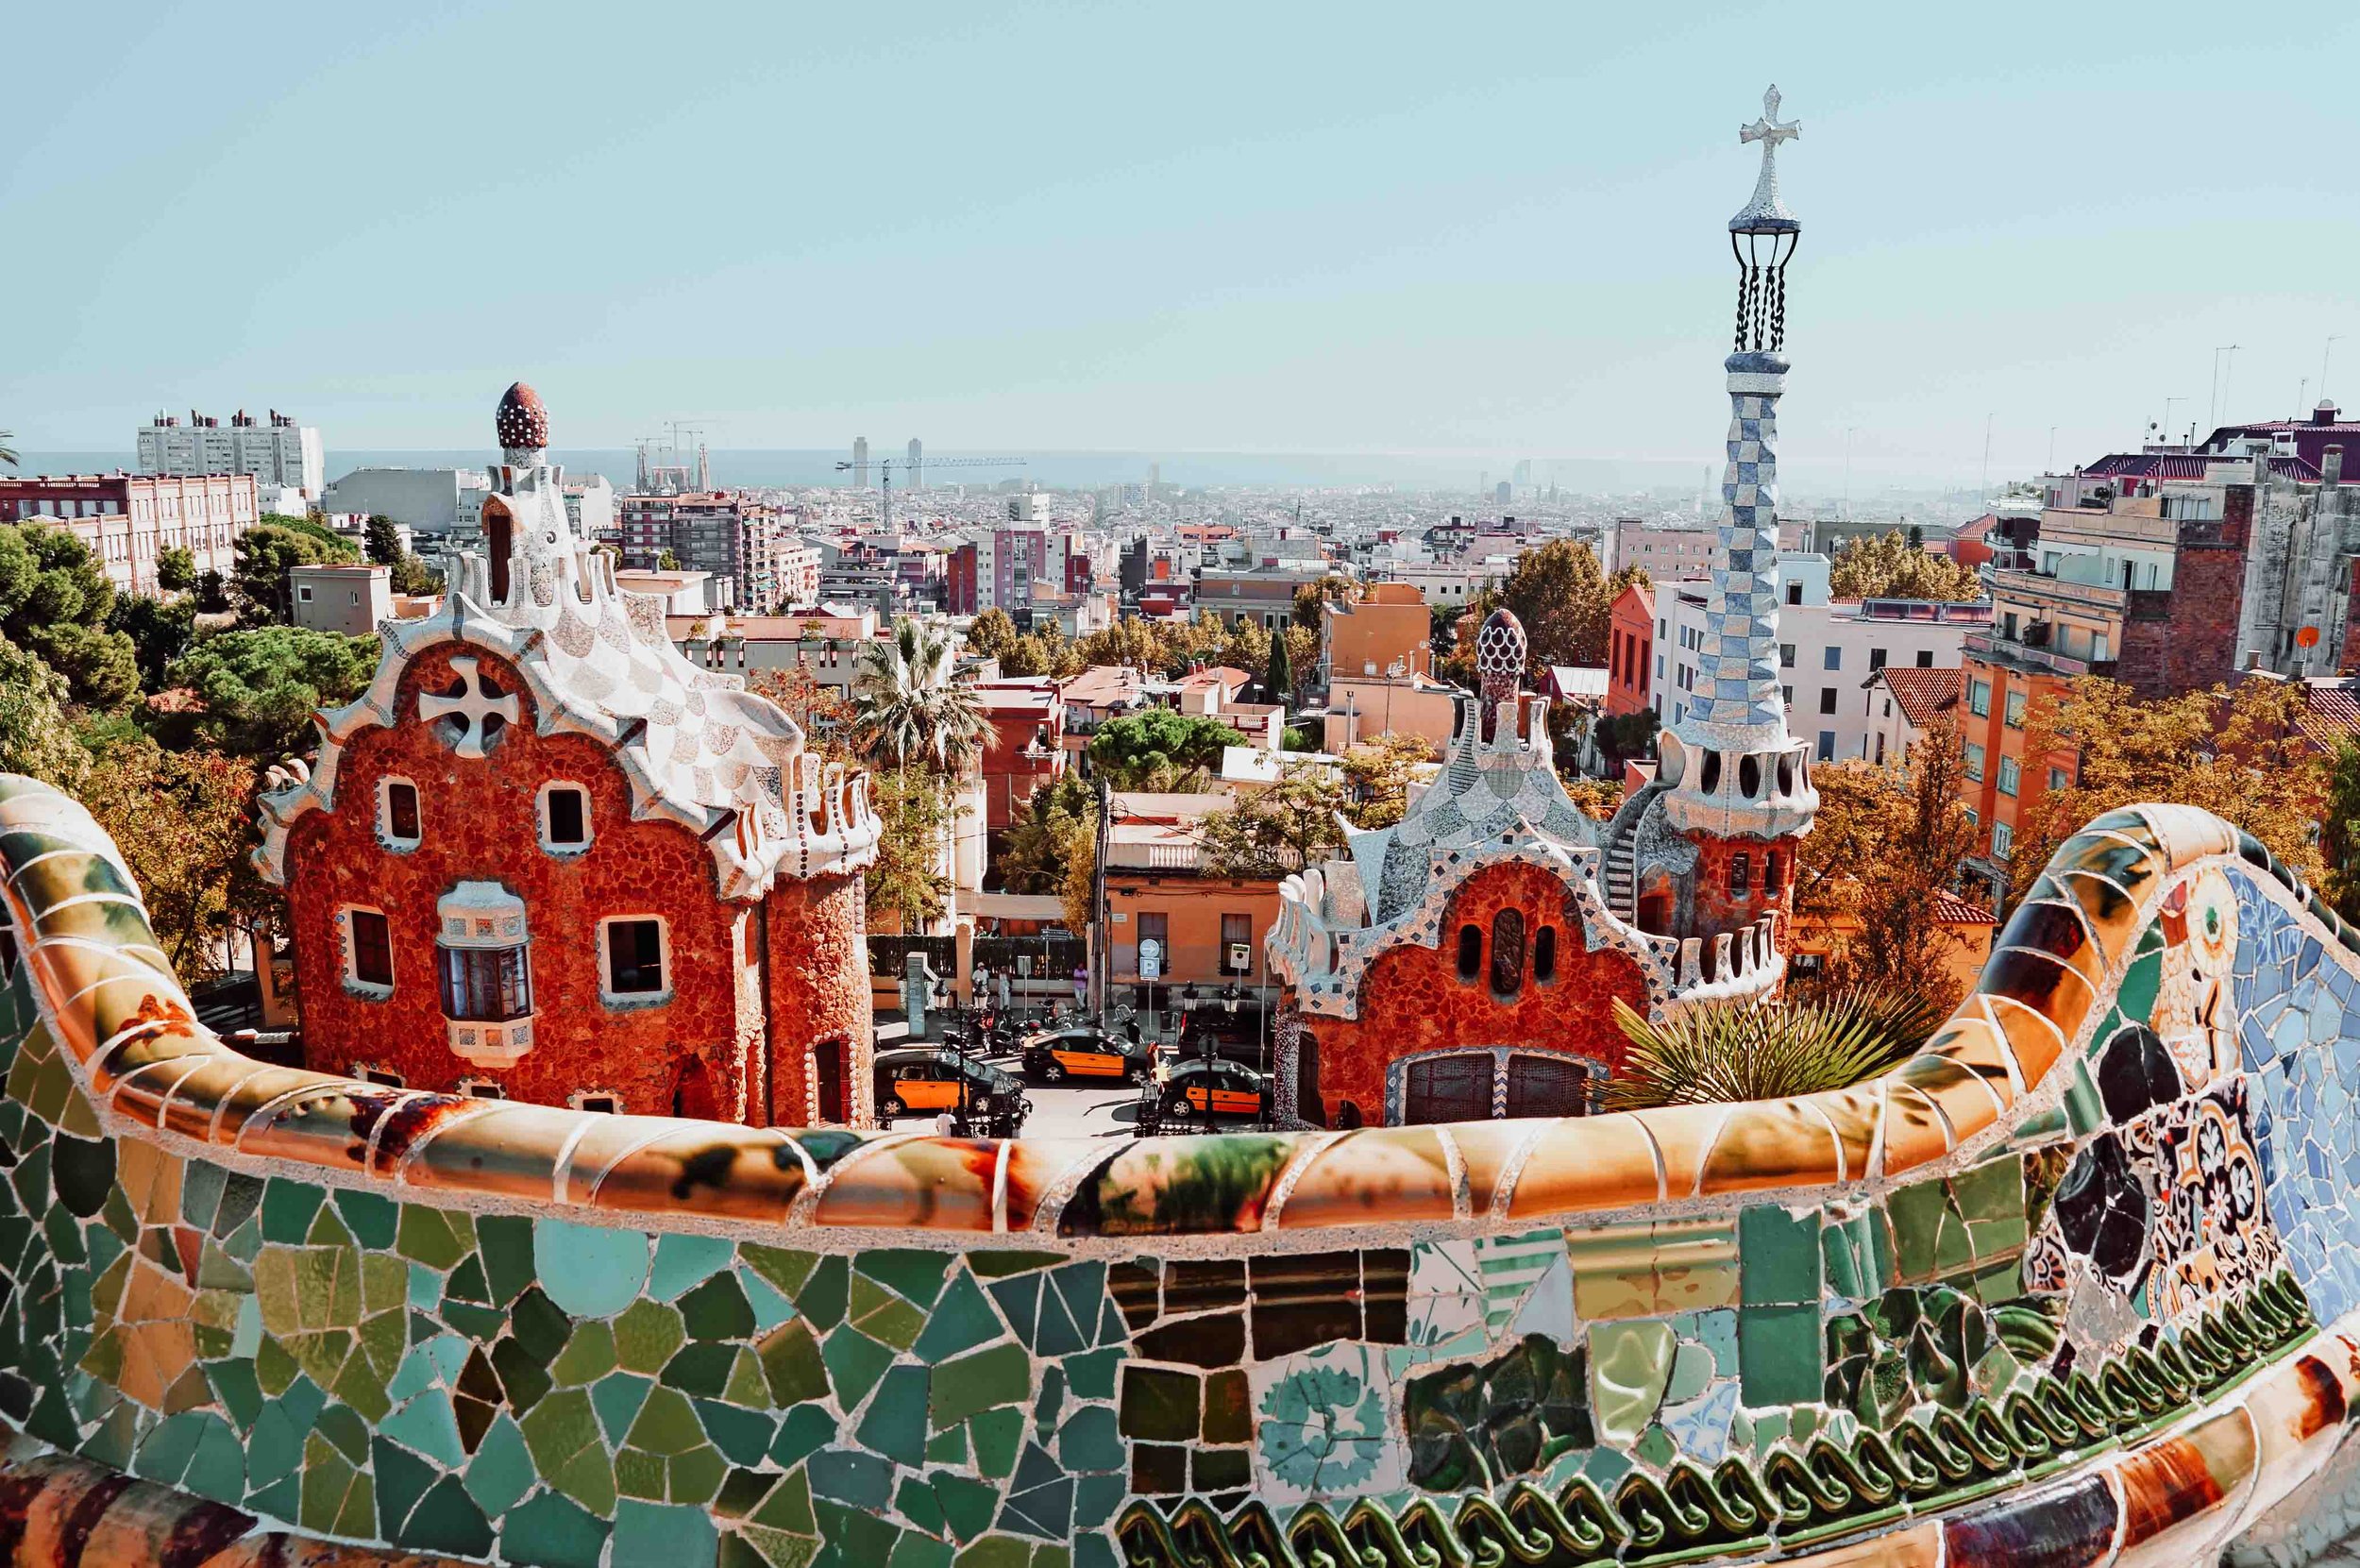 Colourful structures in Park Guell in Barcelona on a 3 months in Europe itinerary